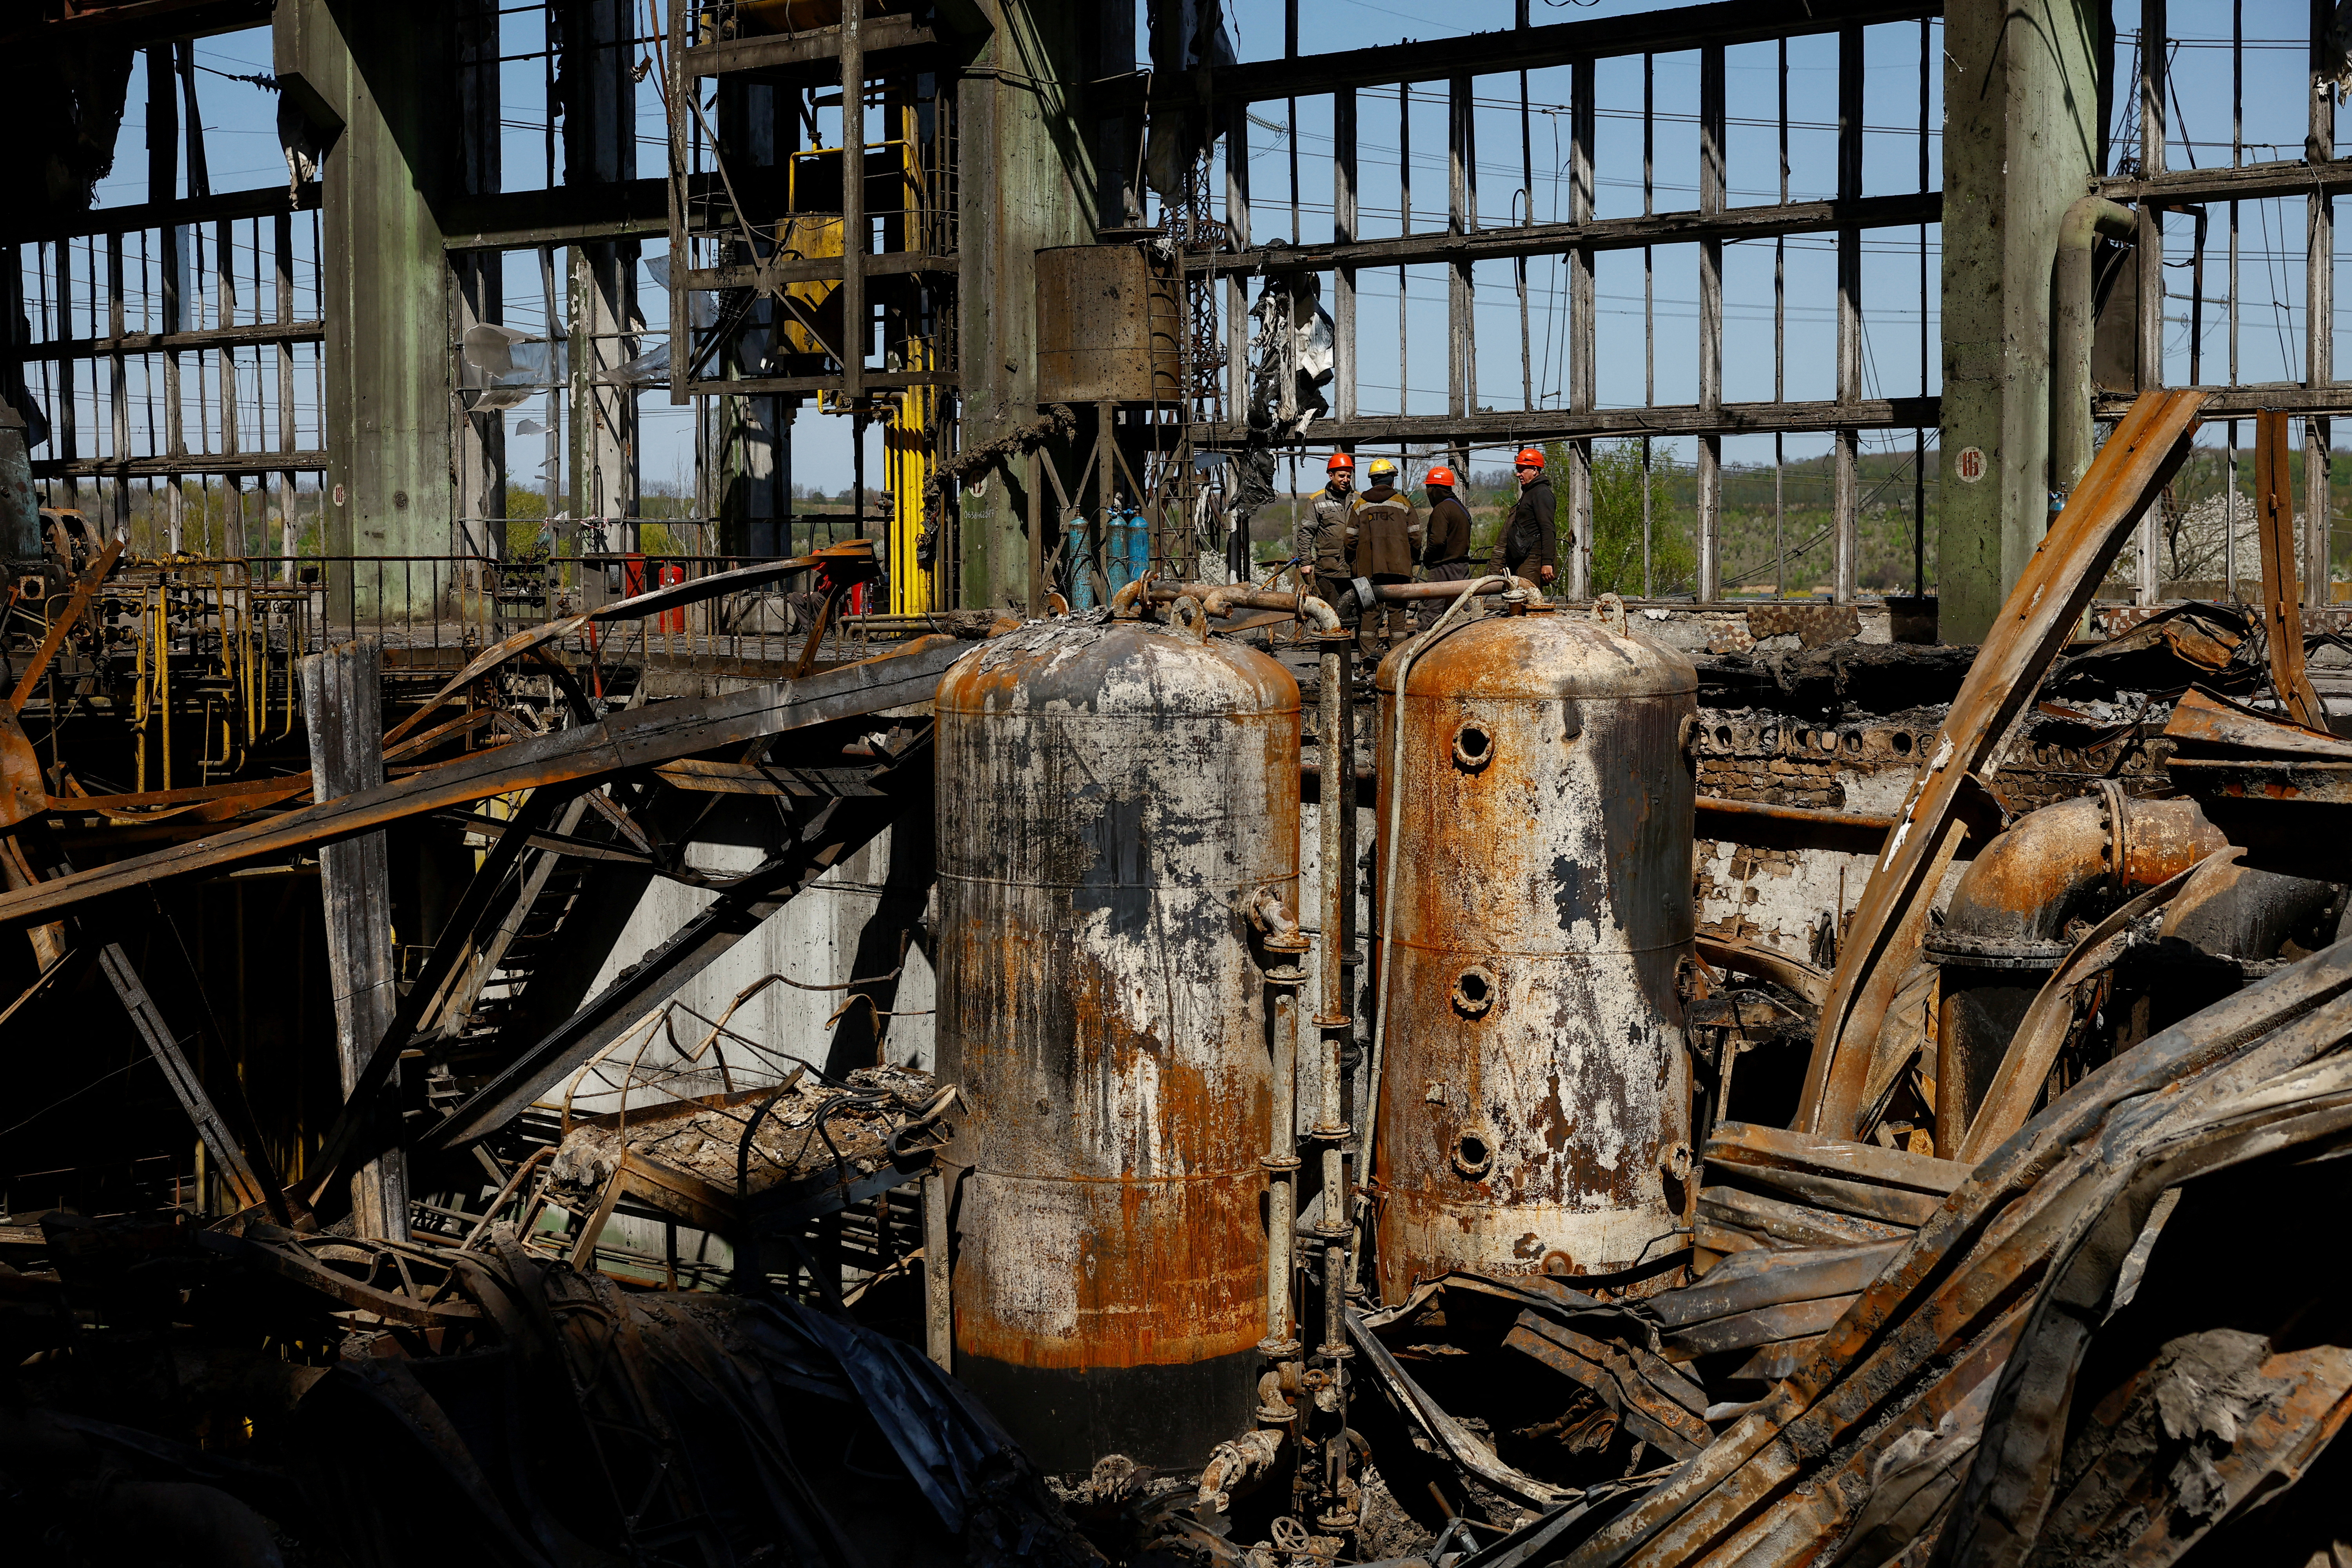 Employees work at a thermal power plant heavily damaged by recent Russian missile strikes in Ukraine